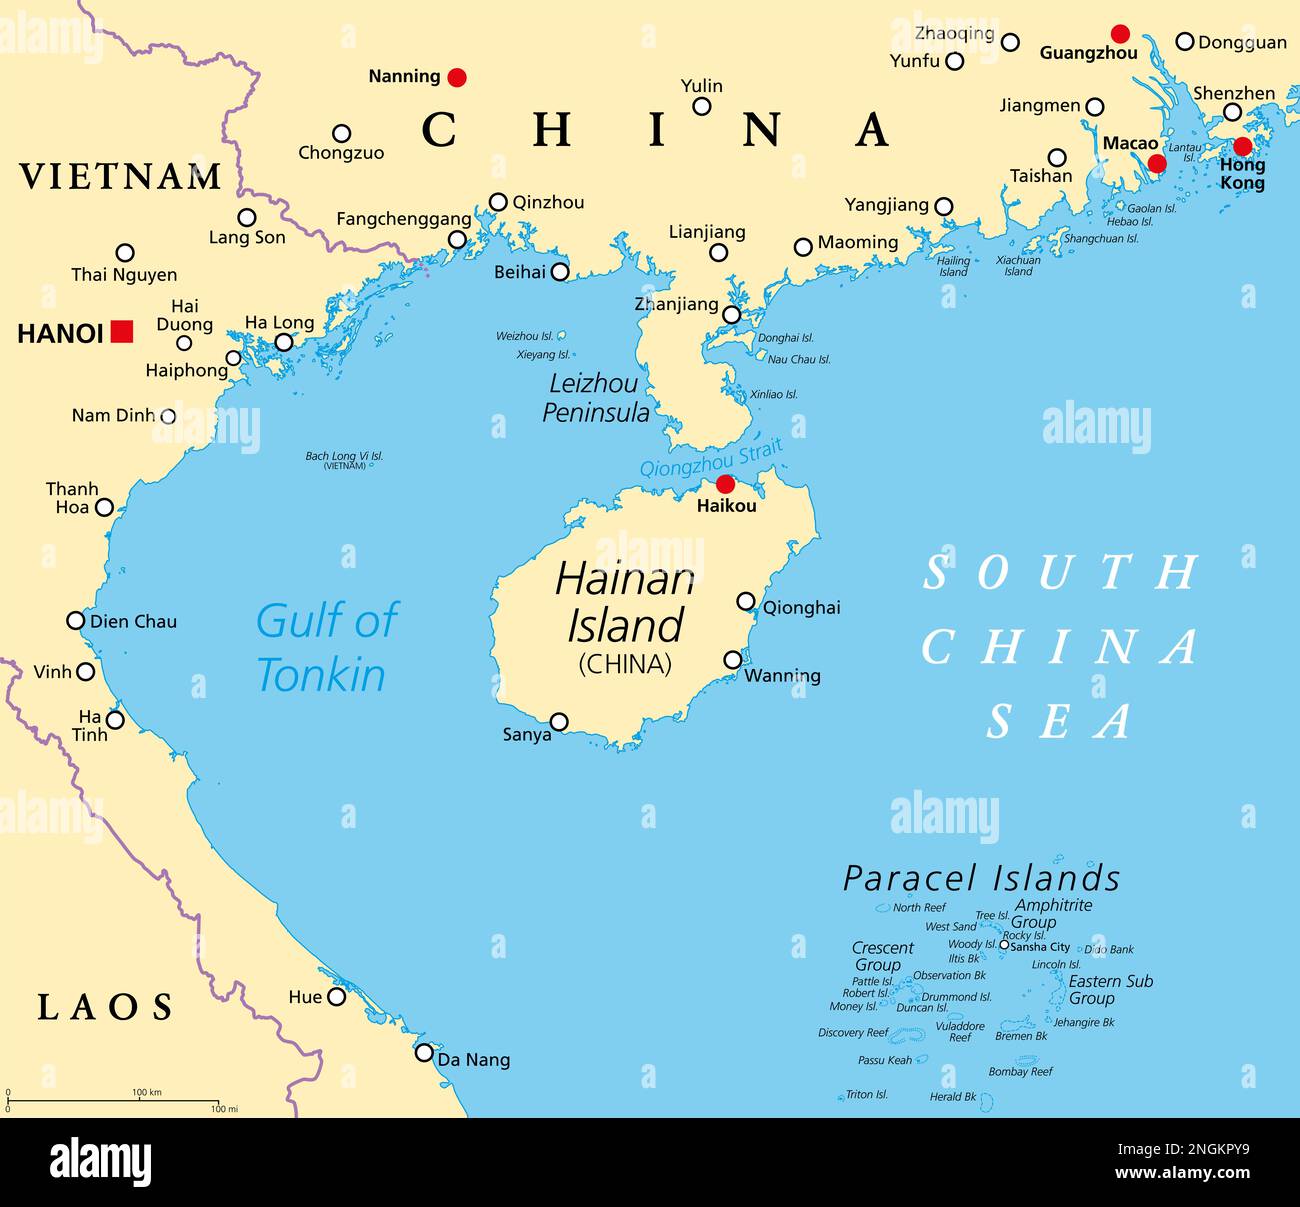 Hainan, southernmost province of China, and surrounding area, political map. Hainan Island, and the Paracel Islands, in the South China Sea. Stock Photo